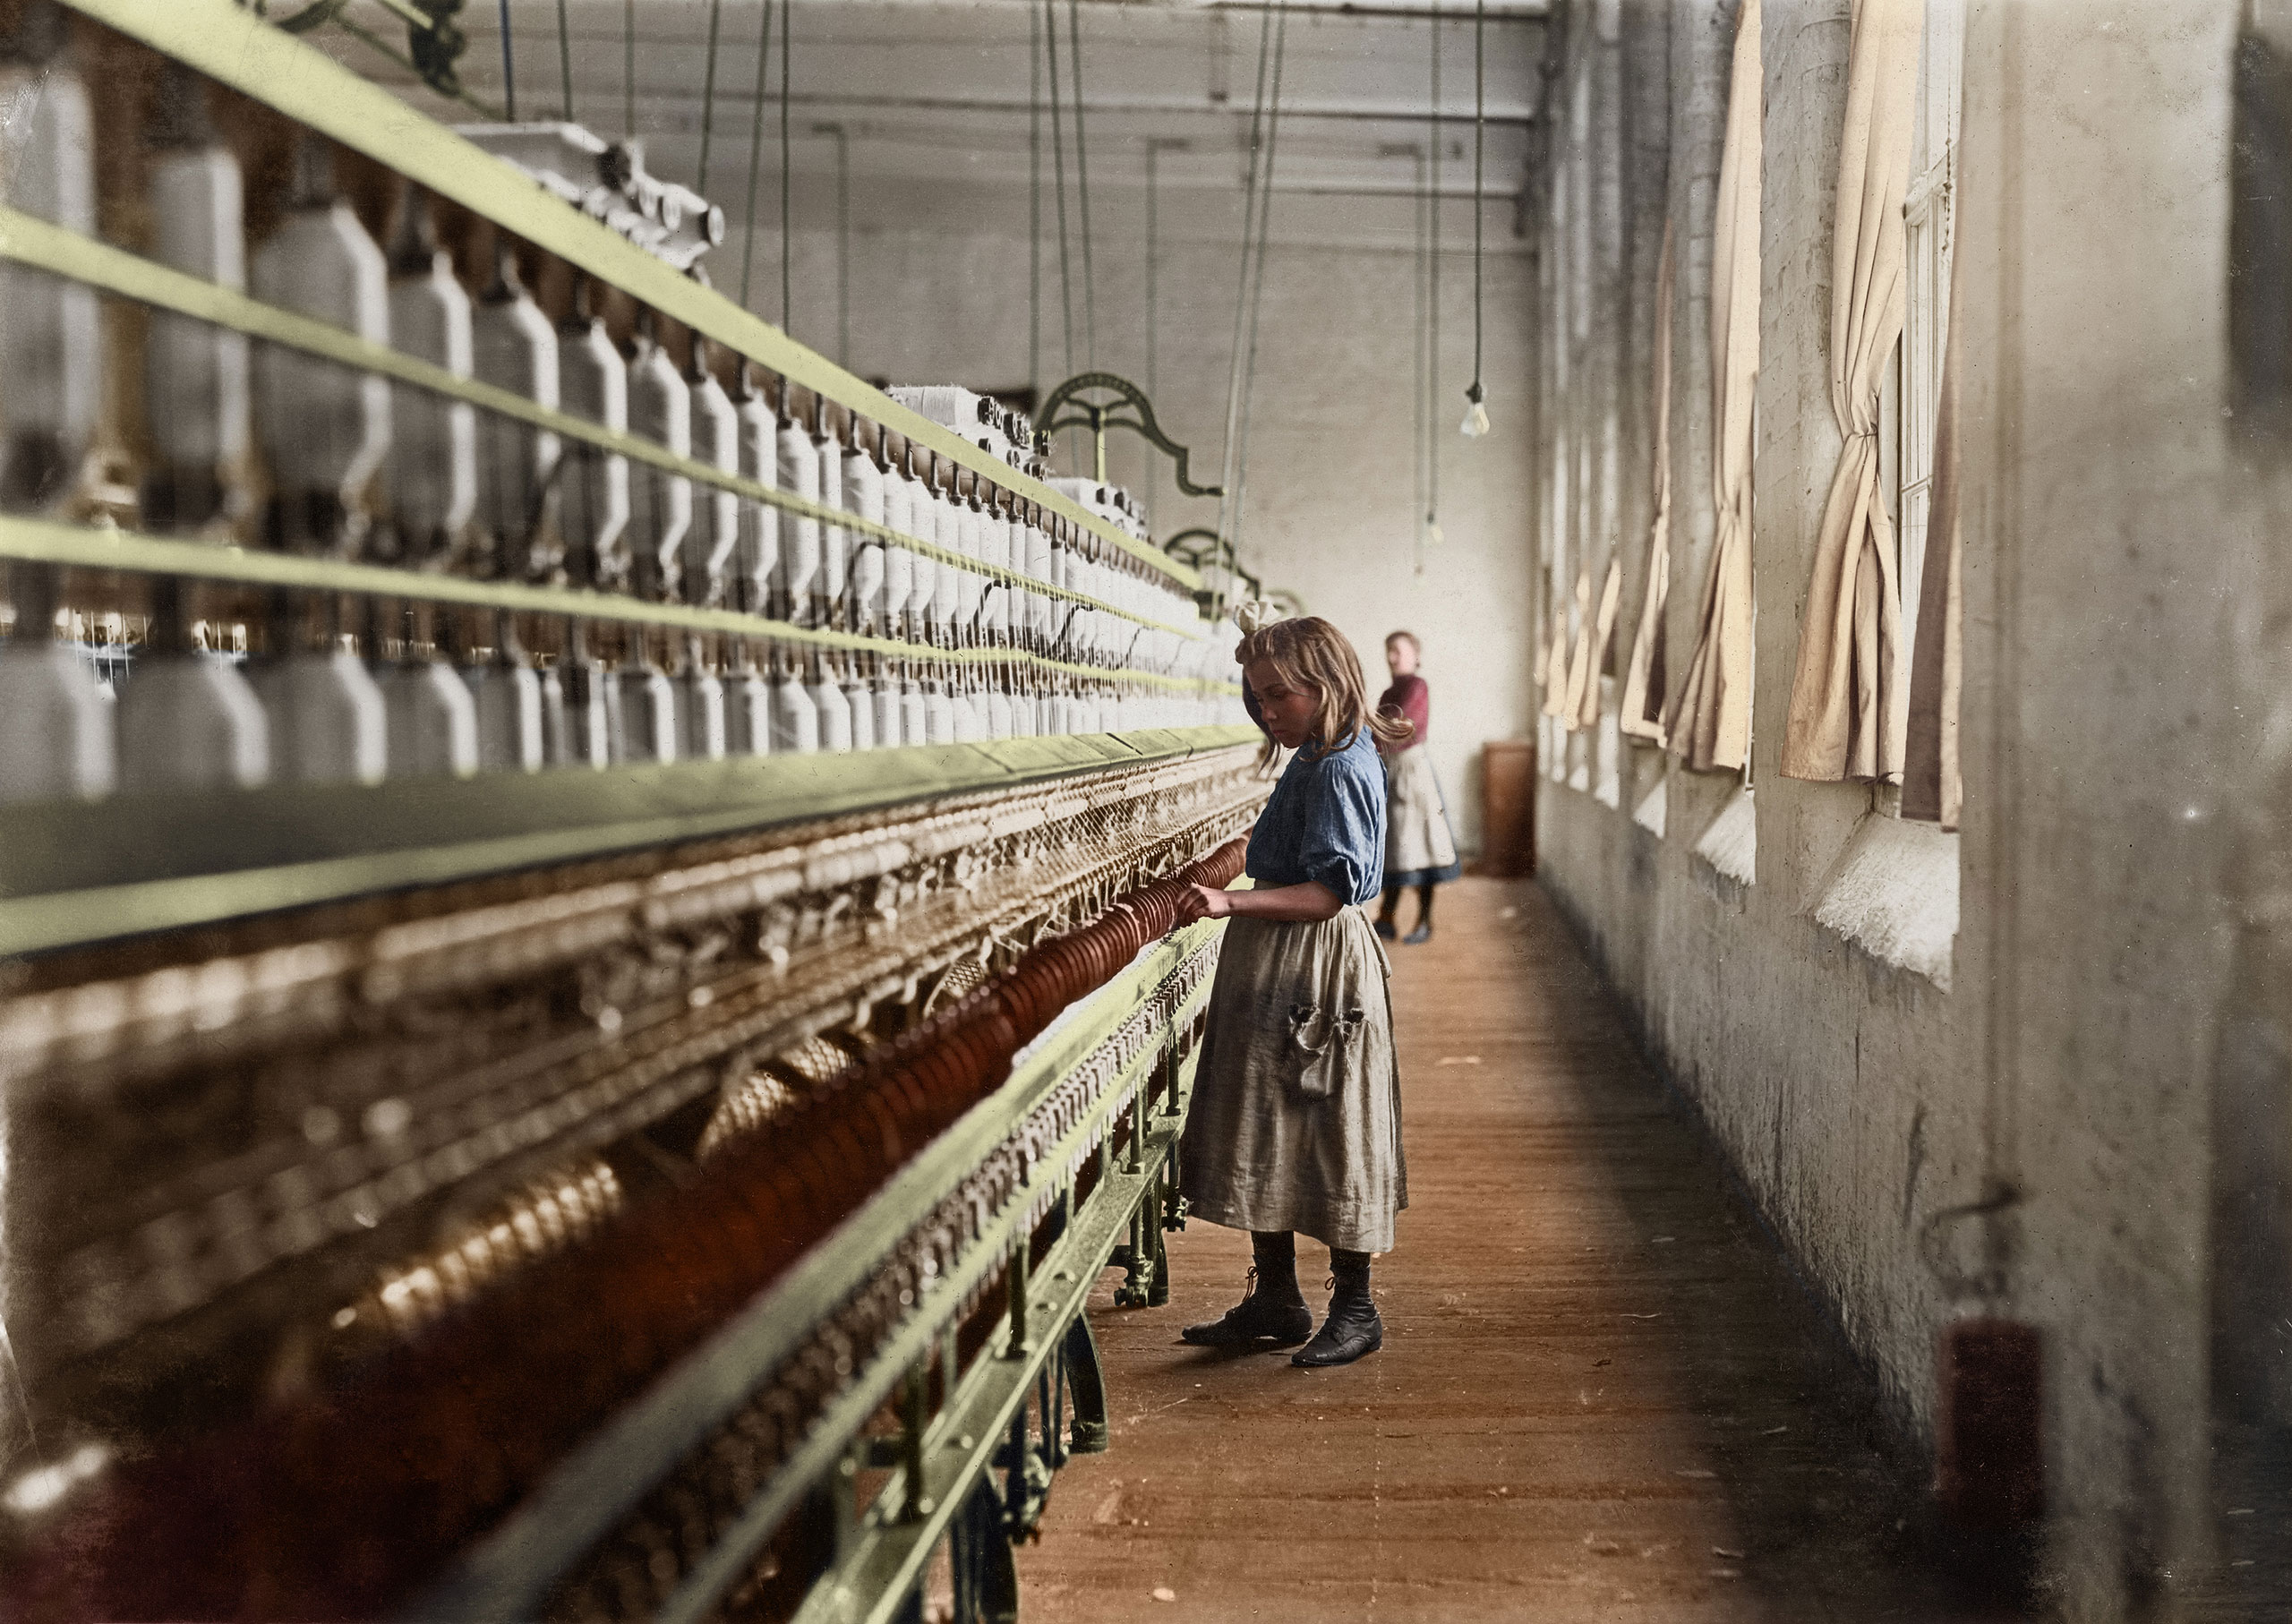 Girl Worker in Carolina Cotton Mill by Lewis Hine, 1908.